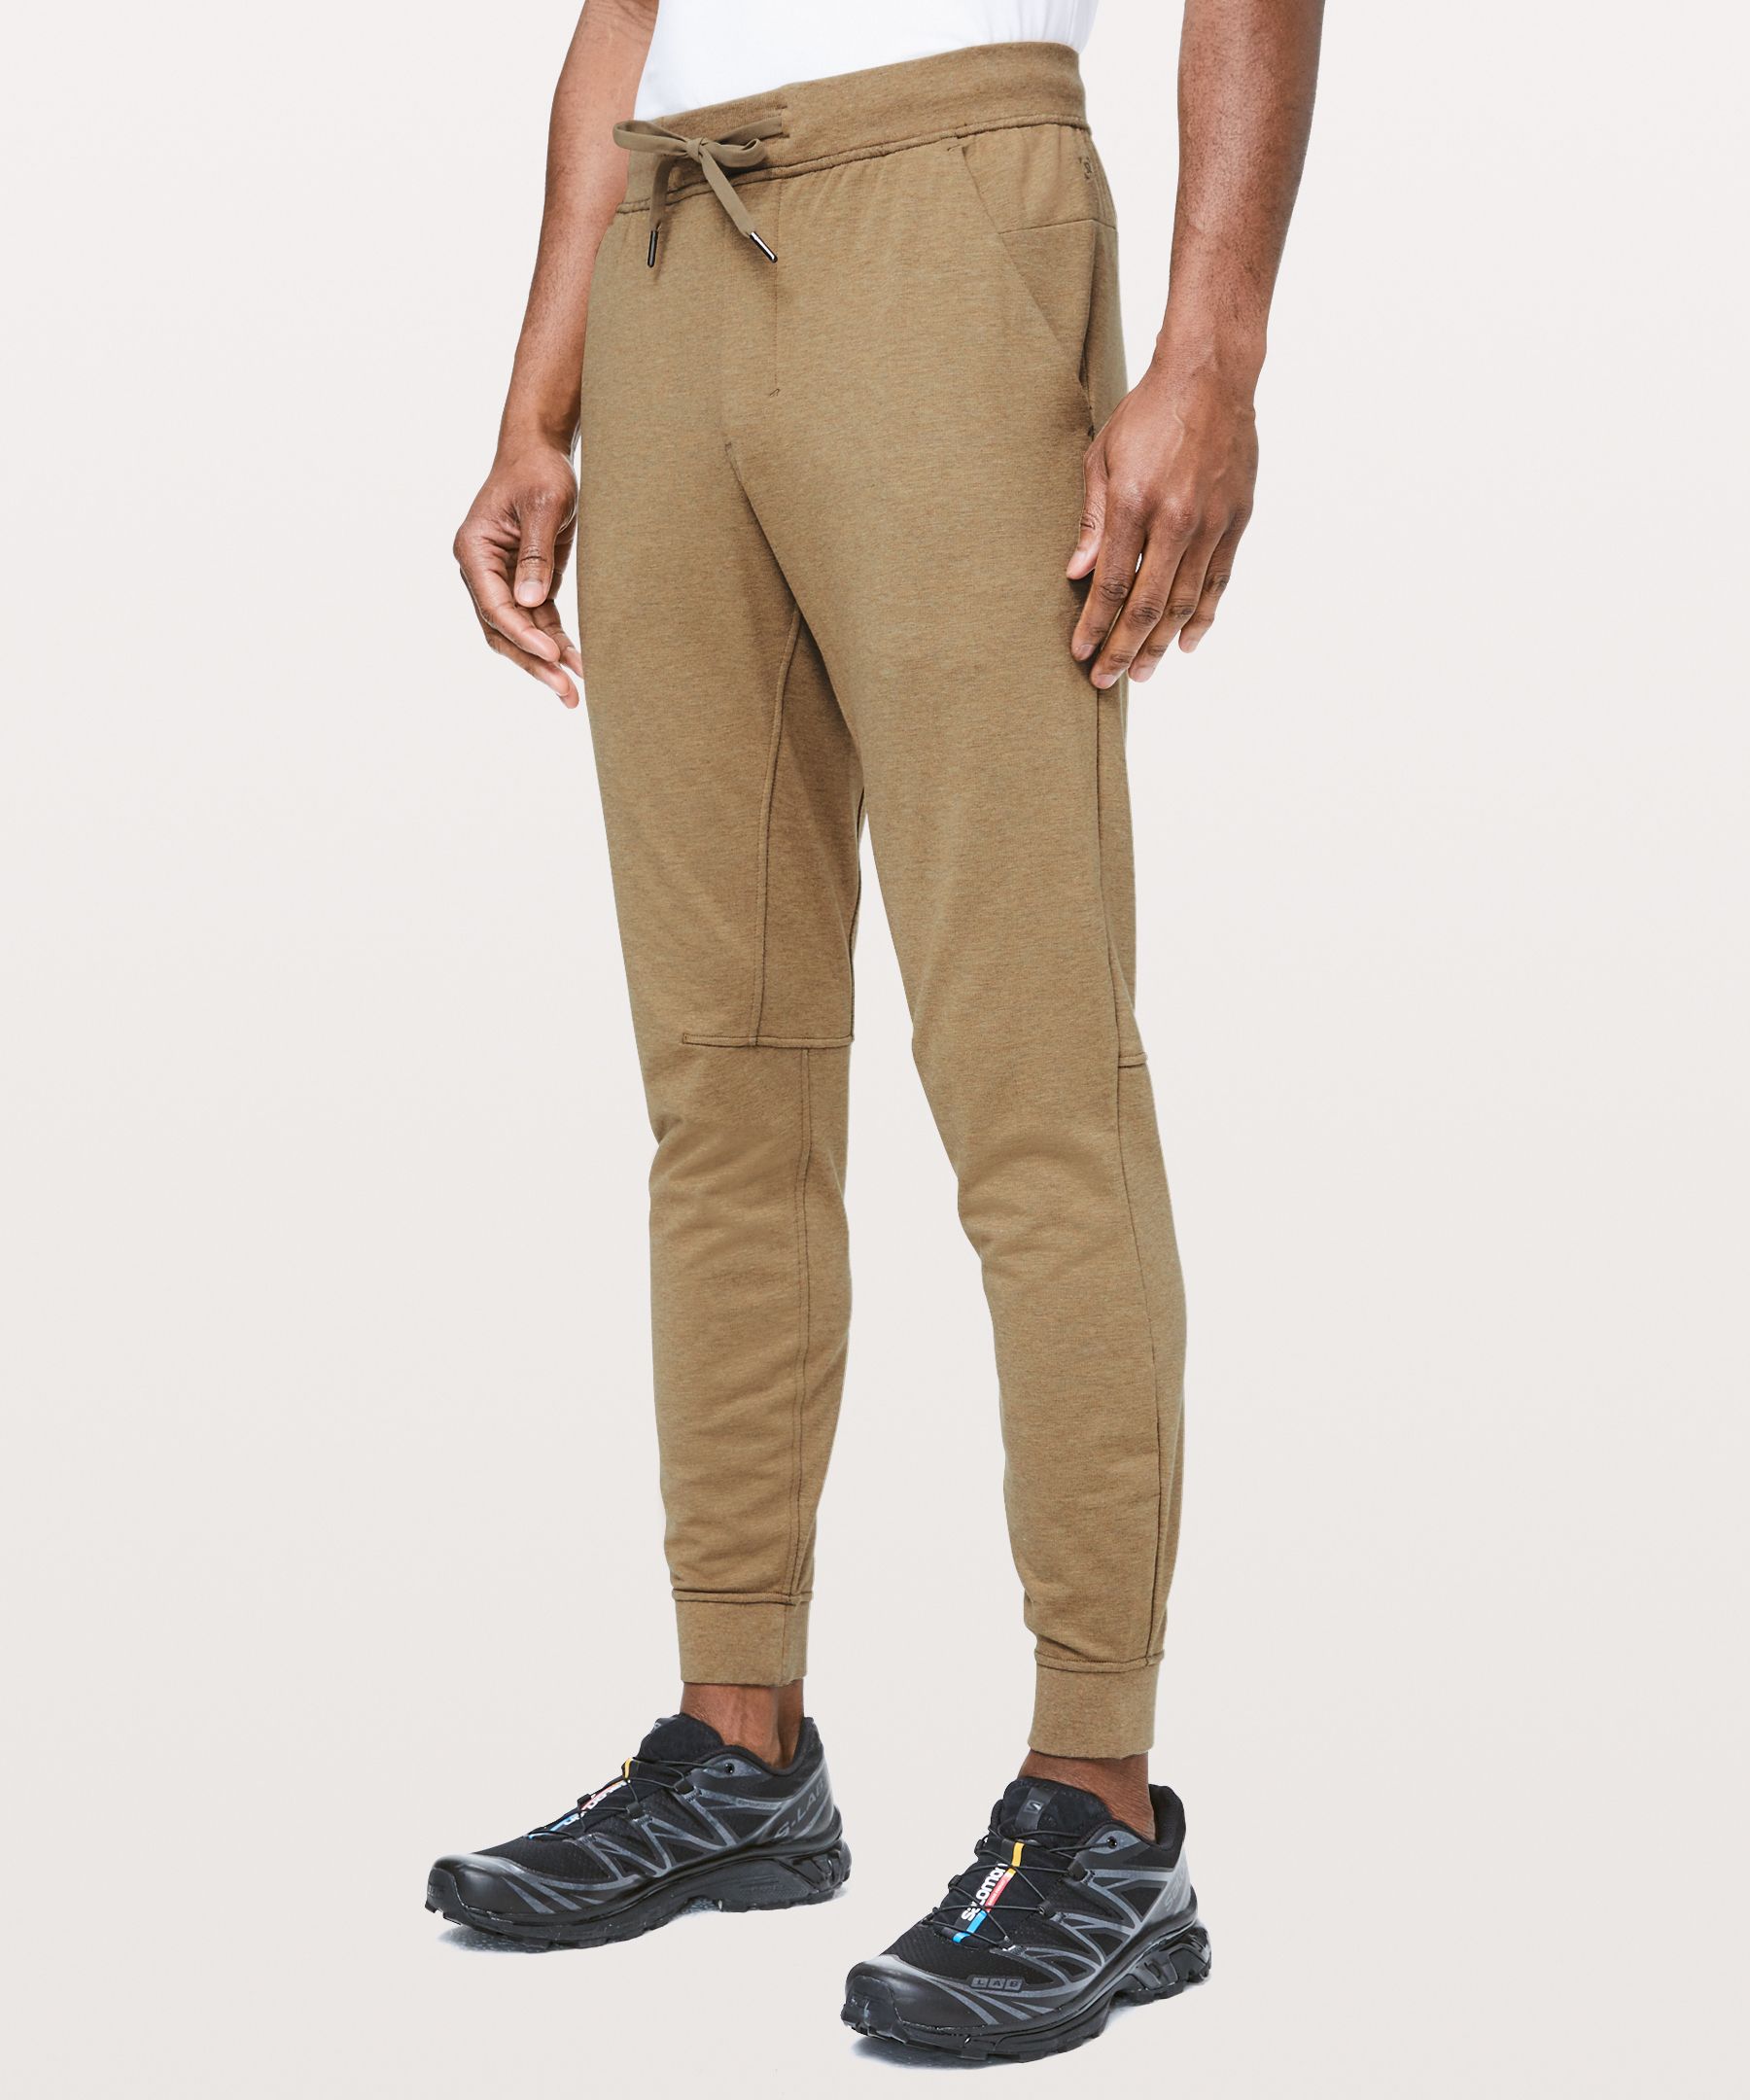 Lululemon City Sweat Jogger French Terry 29" In Heathered Frontier